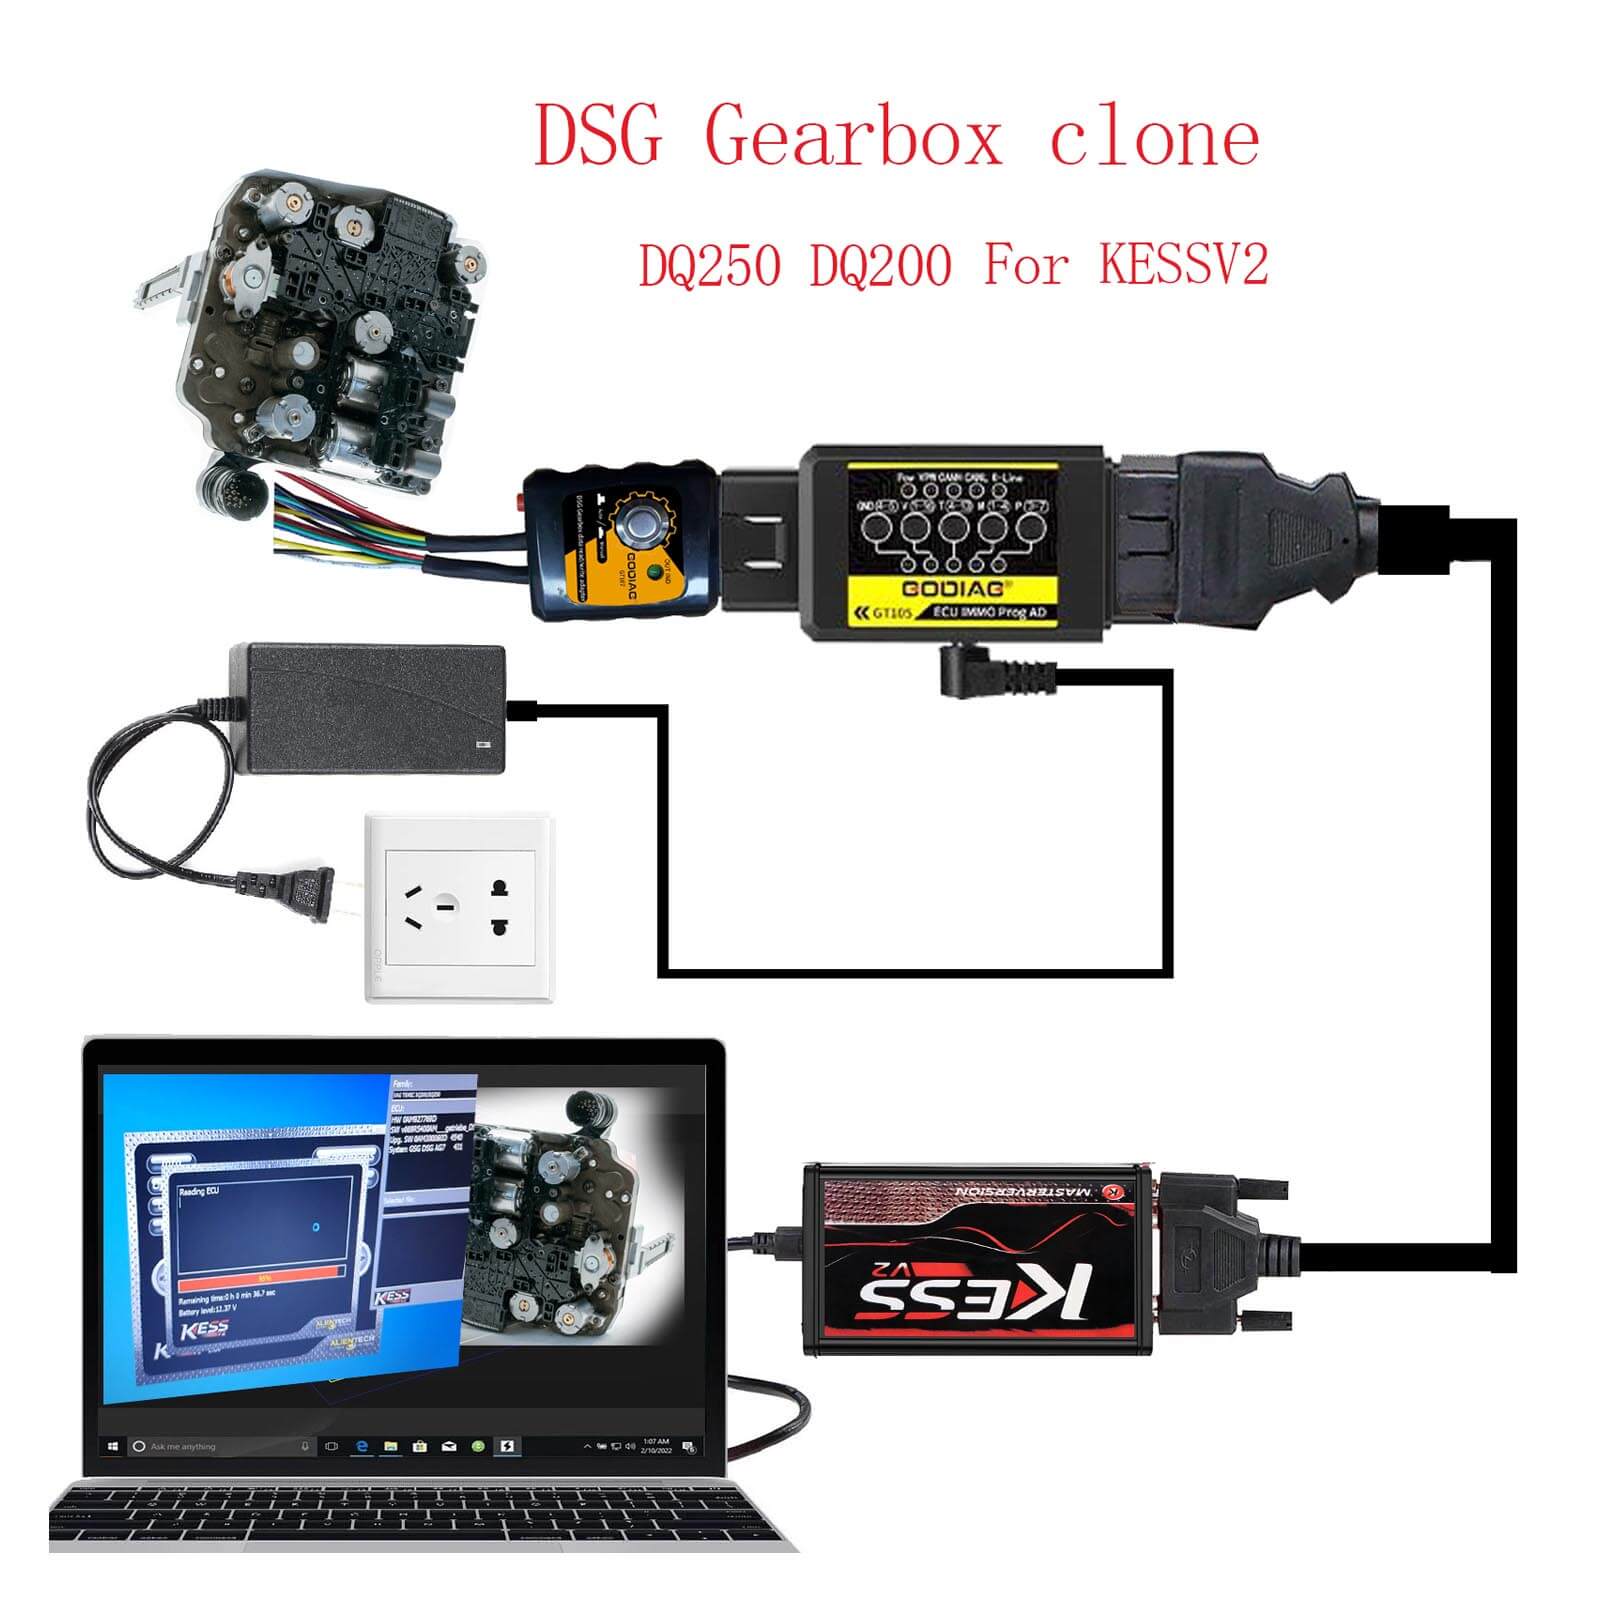 GODIAG GT107 ECU IMMO Kit Plus GT105 DSG Gearbox Data Read/Write Adapter for DQ250, DQ200, VL381, VL300, DQ500, DL501